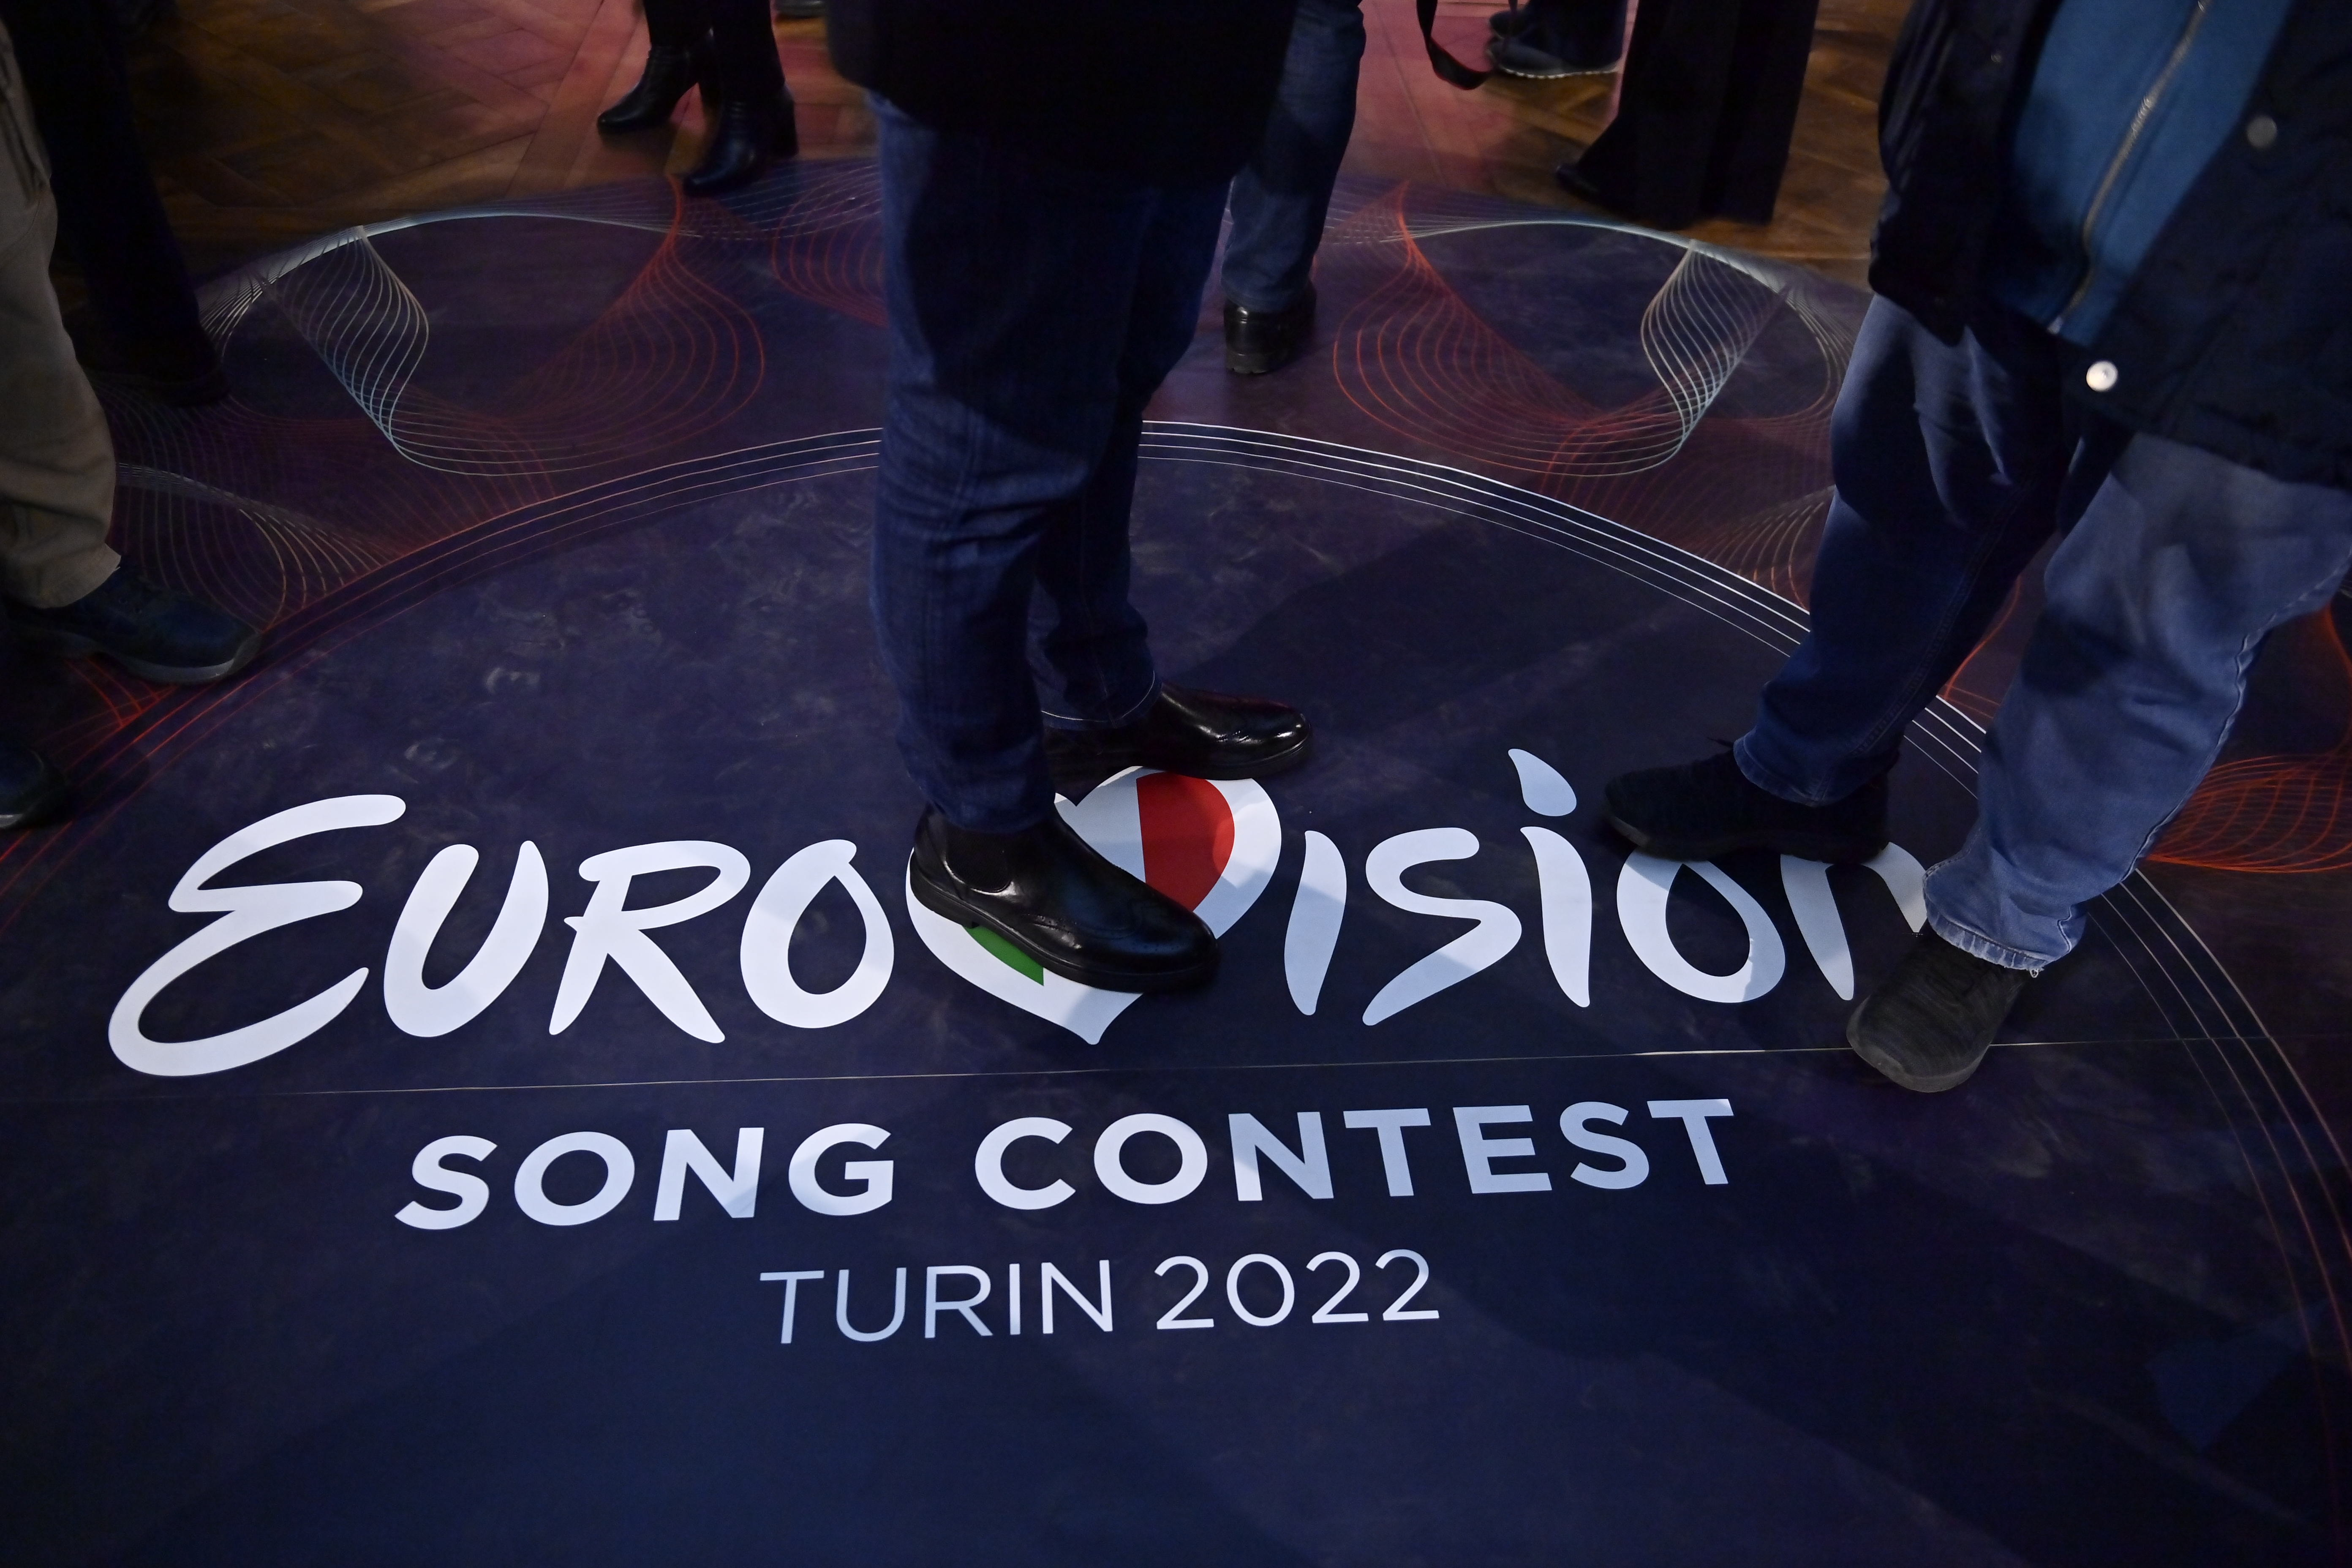 Russian Banned From Eurovision Song Contest After Ukraine Invasion